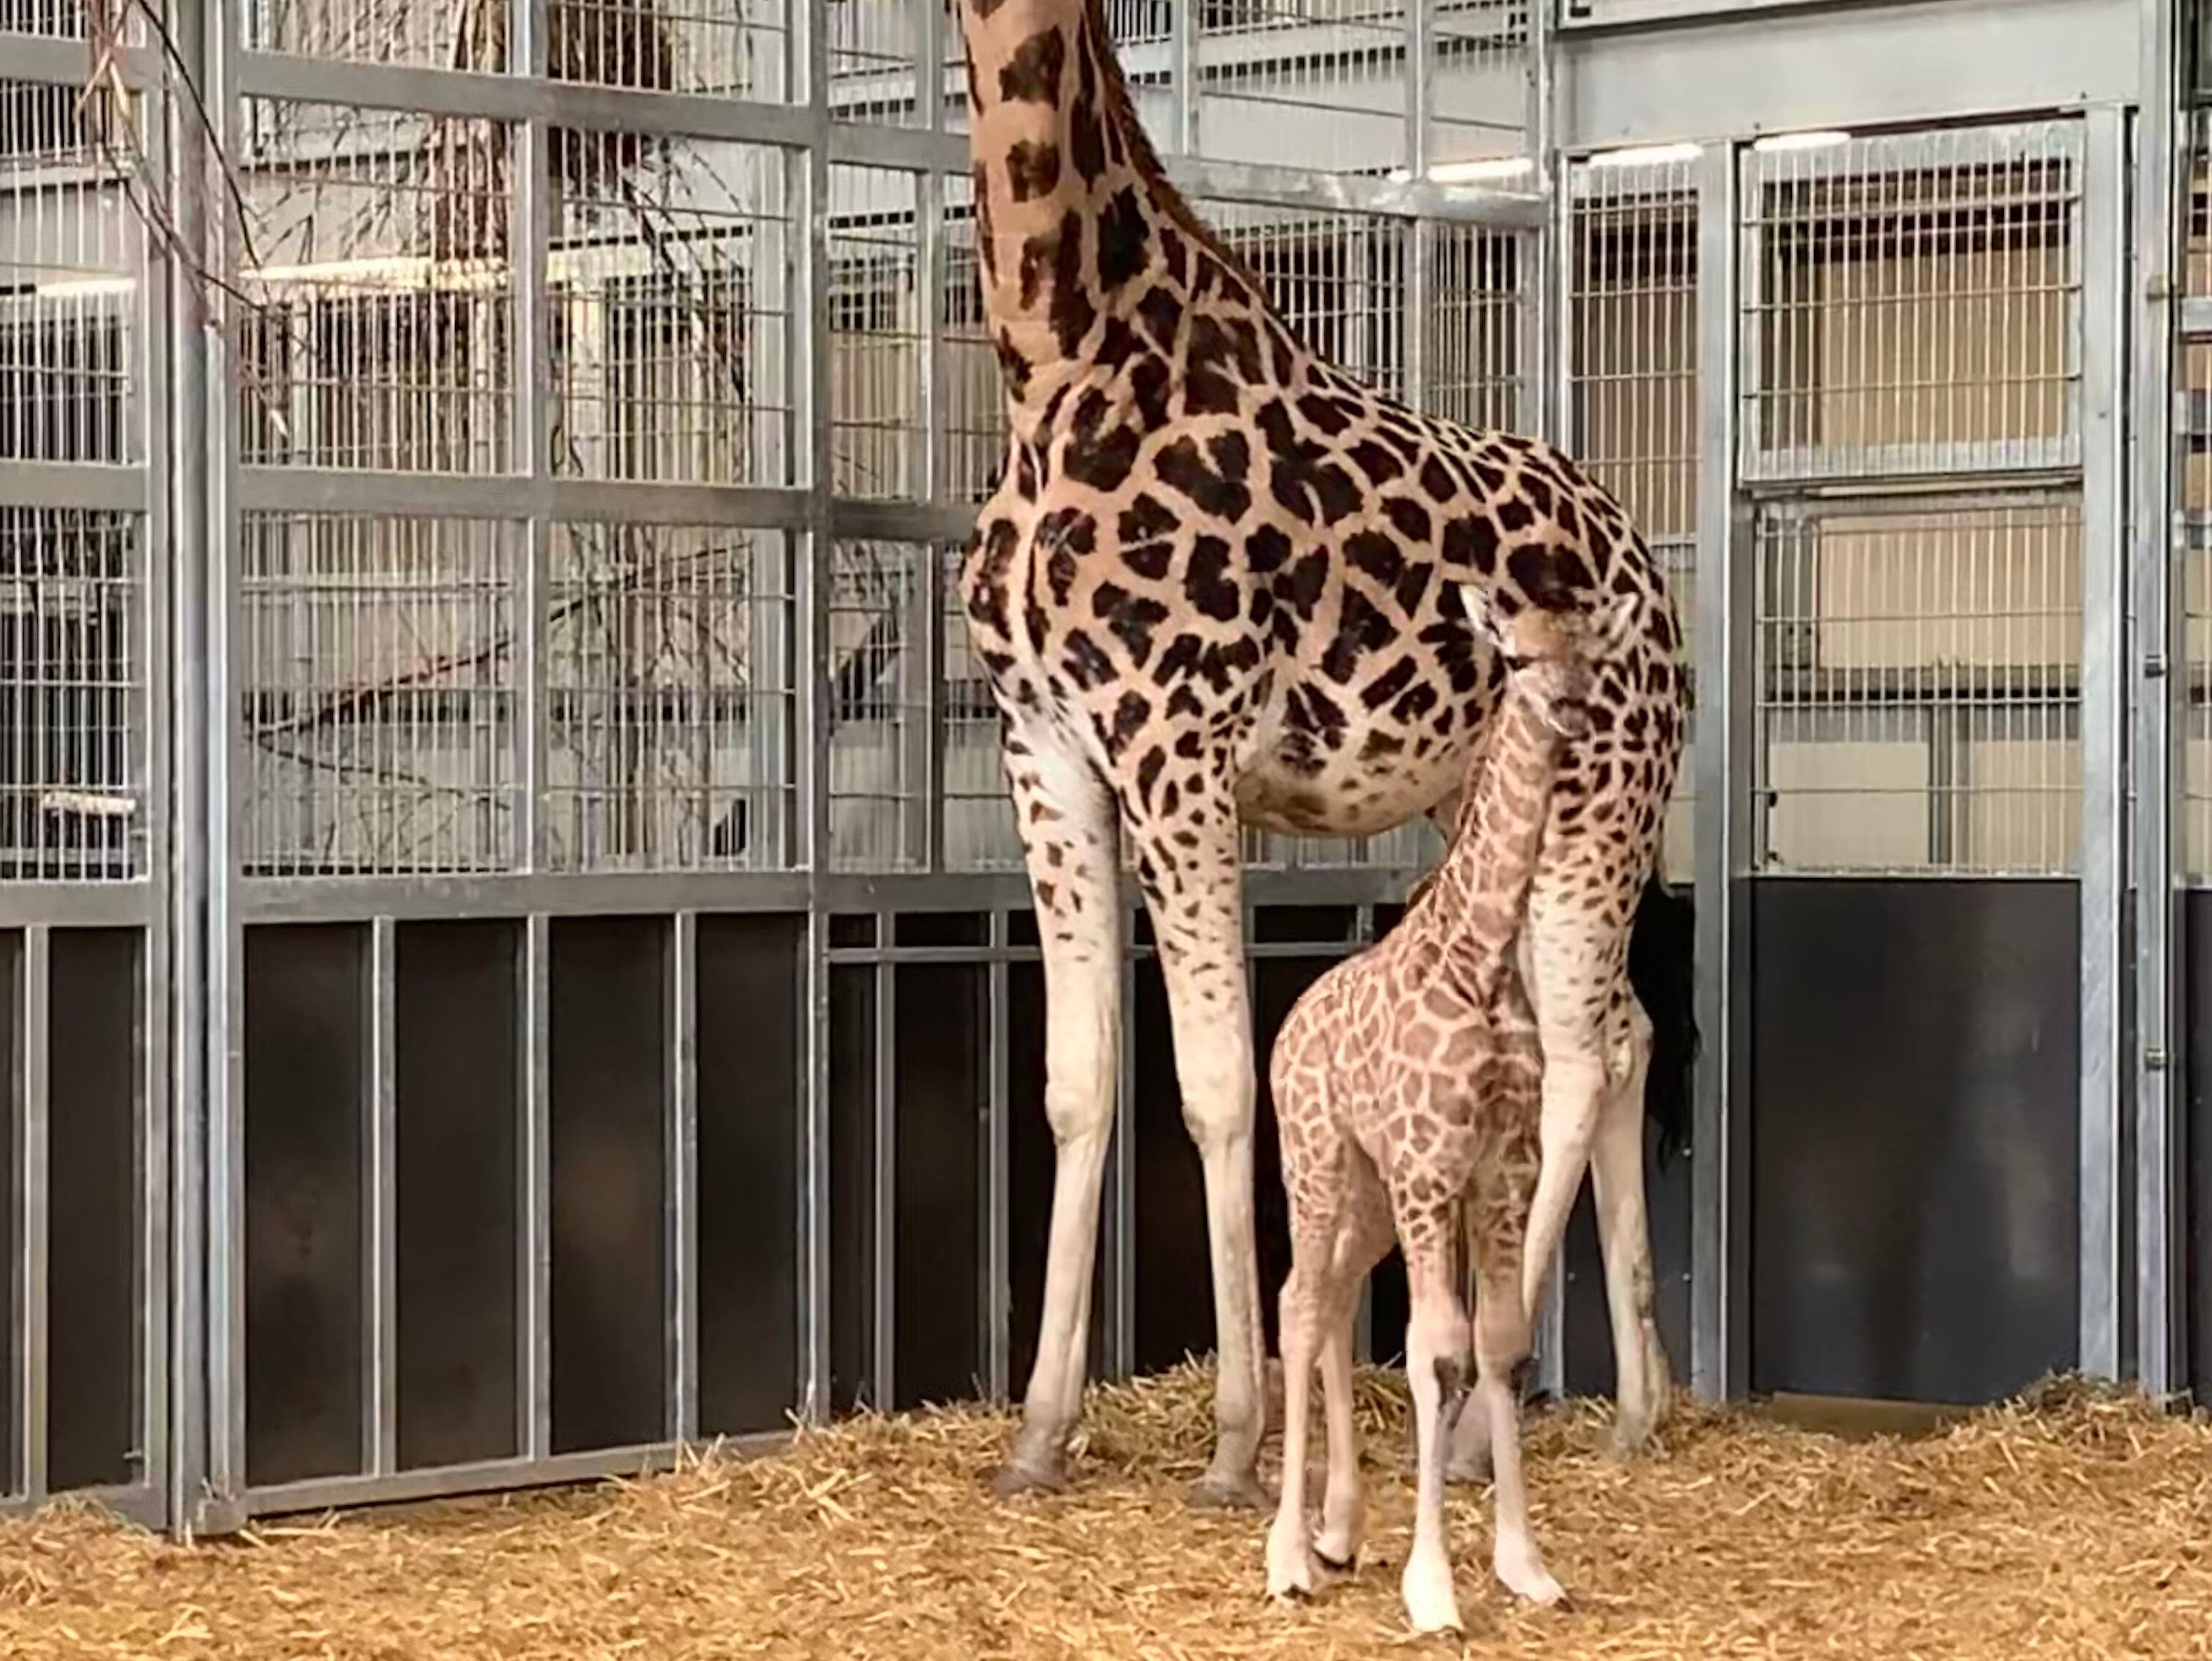 WATCH: Second baby giraffe born at West Midland Safari Park six-weeks after his brother